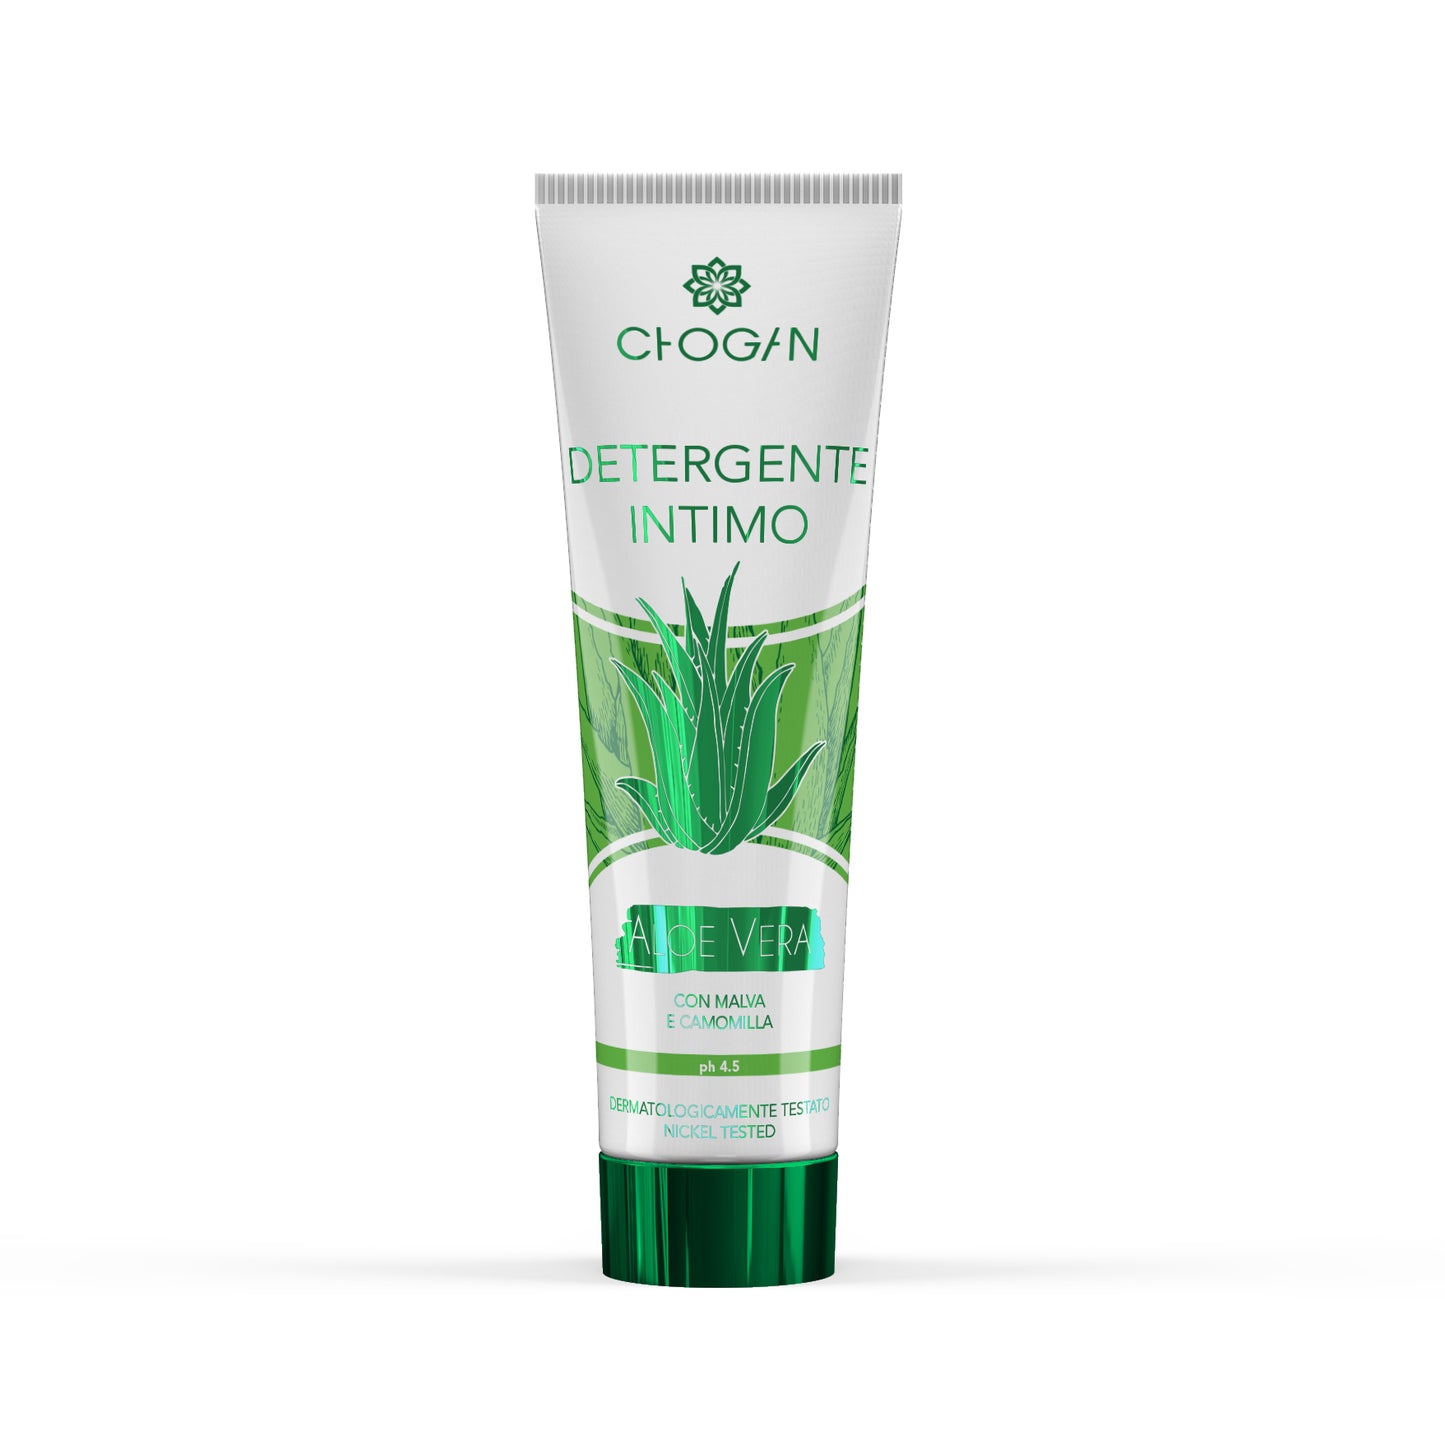 Intimate cleanser with Aloe vera: MINI FORMAT for Travel